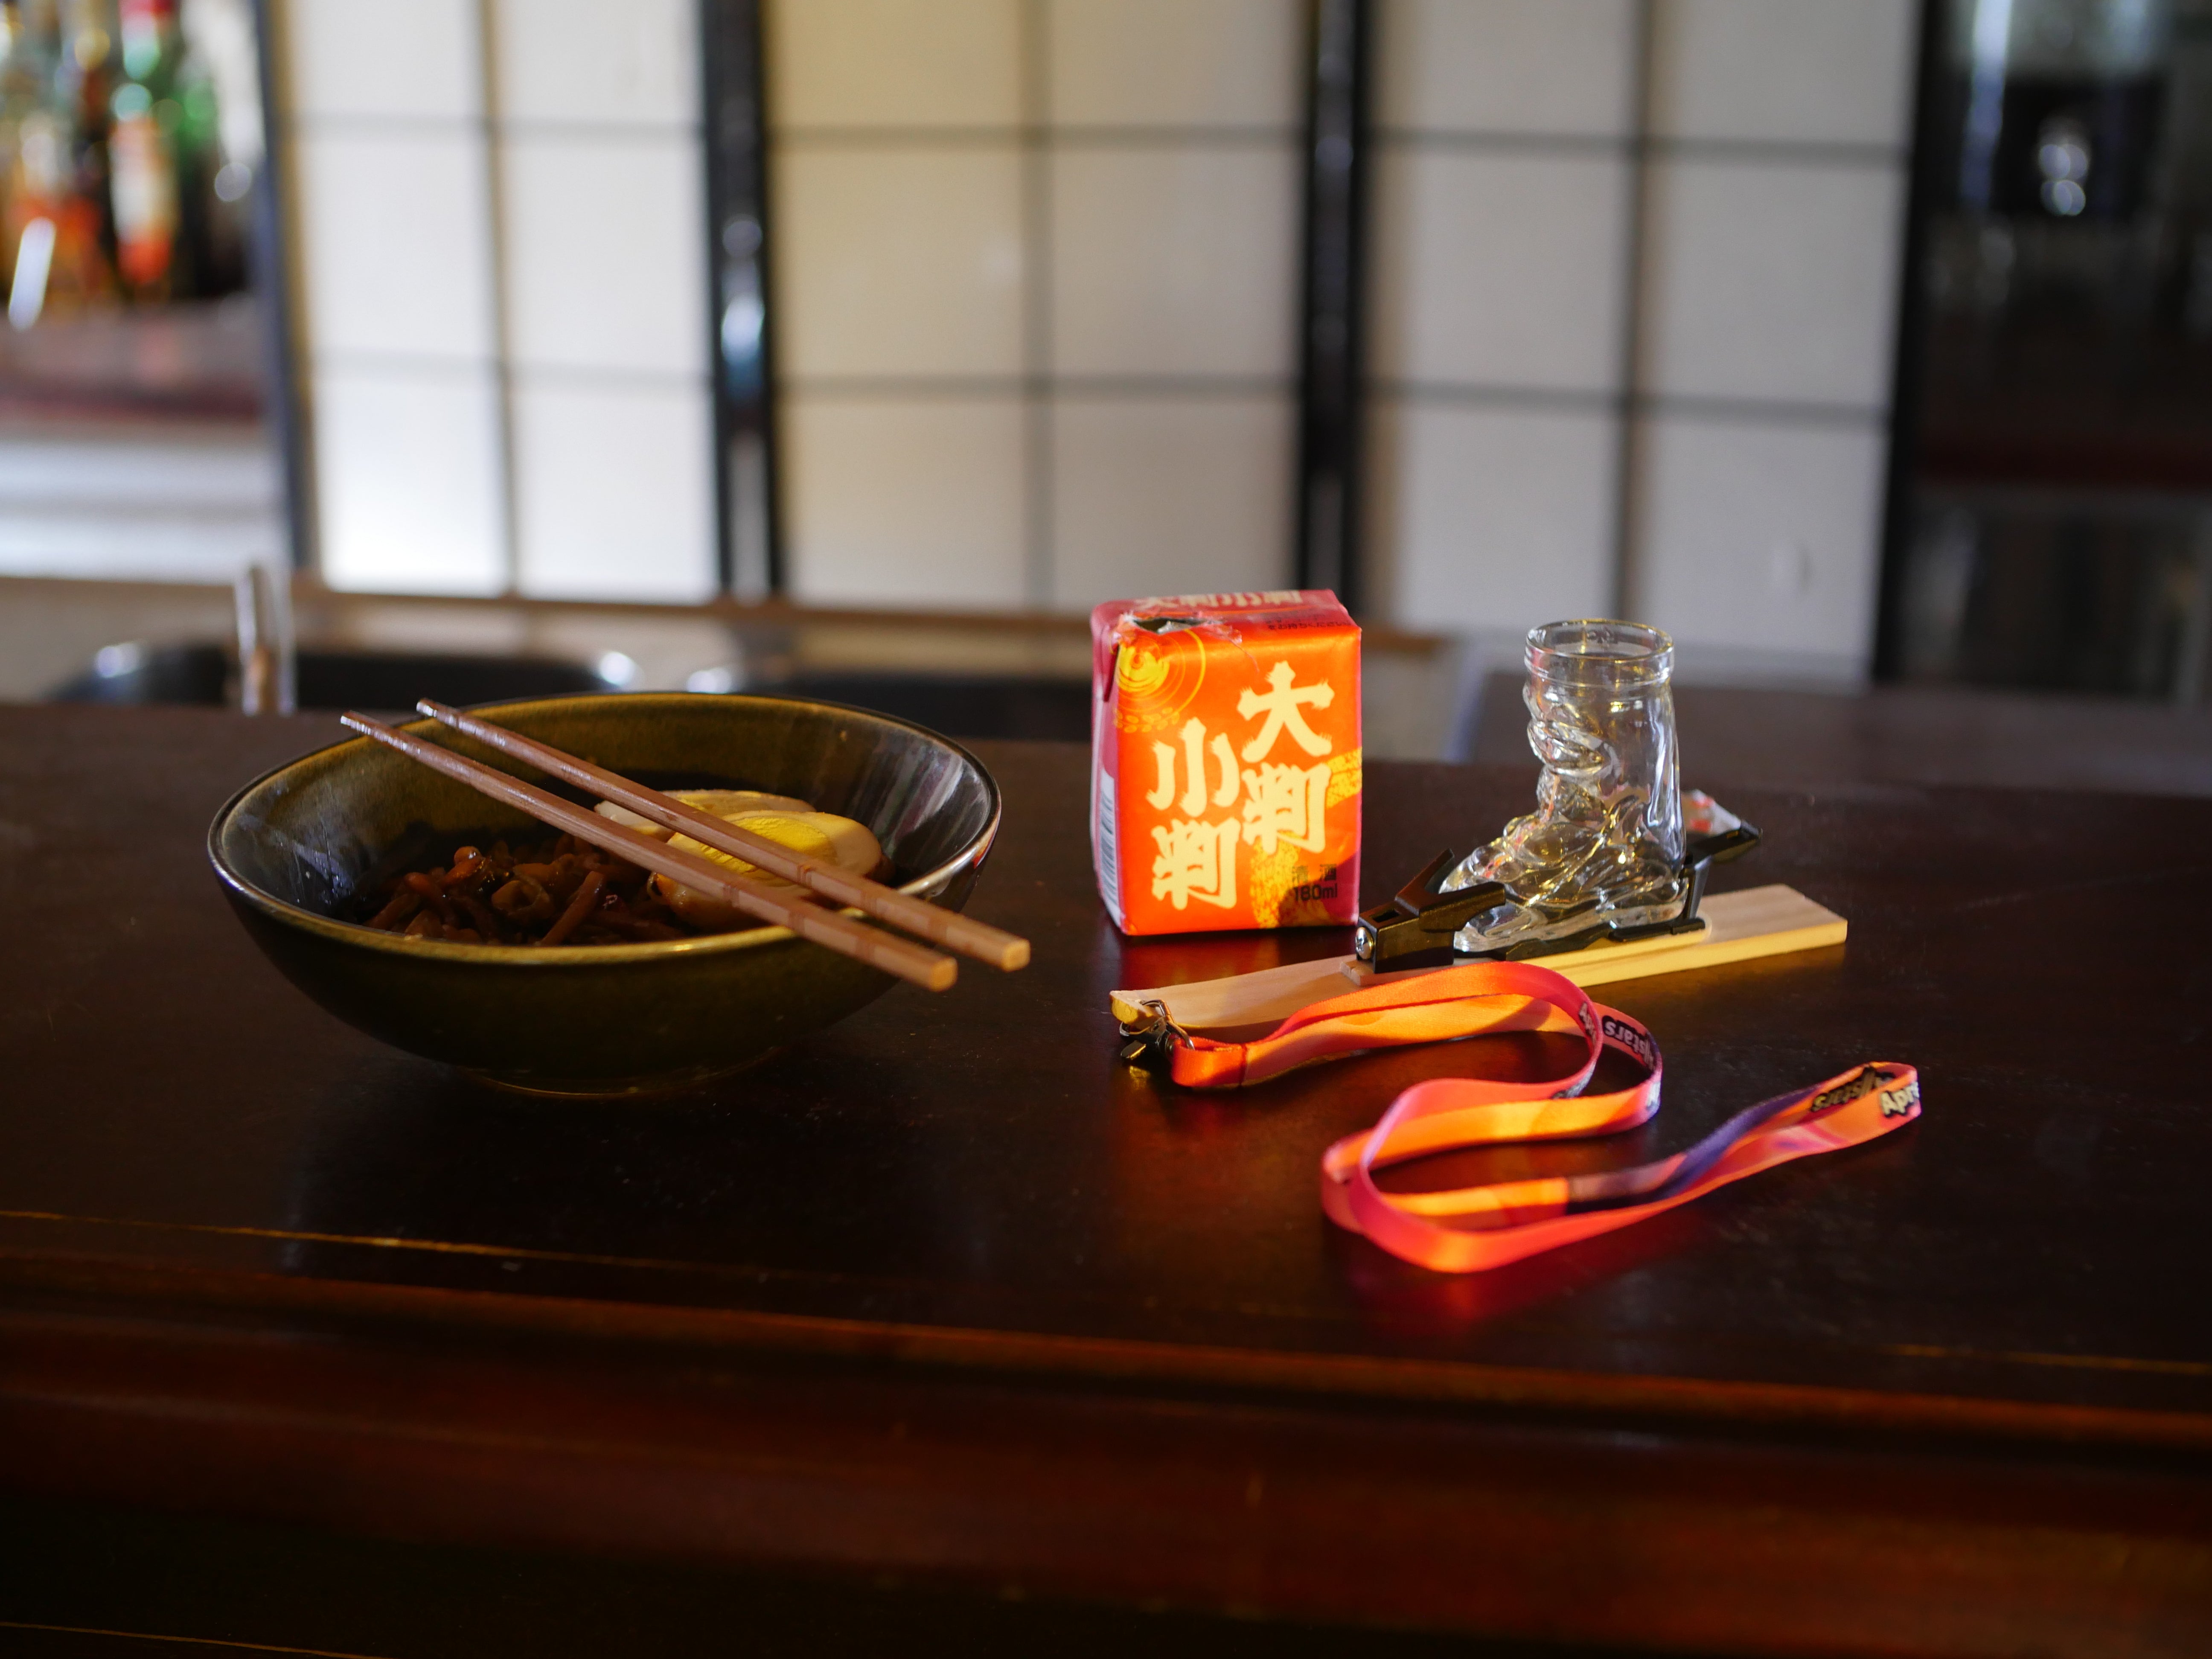 Photo of the mini-ski, fitted with the ski boot shot glass and bindings, on a wooden table in front of a Japanese style white screen/room divider. The table is set with a bowl of food, a pair of chopsticks and a small red box with asian symbols.